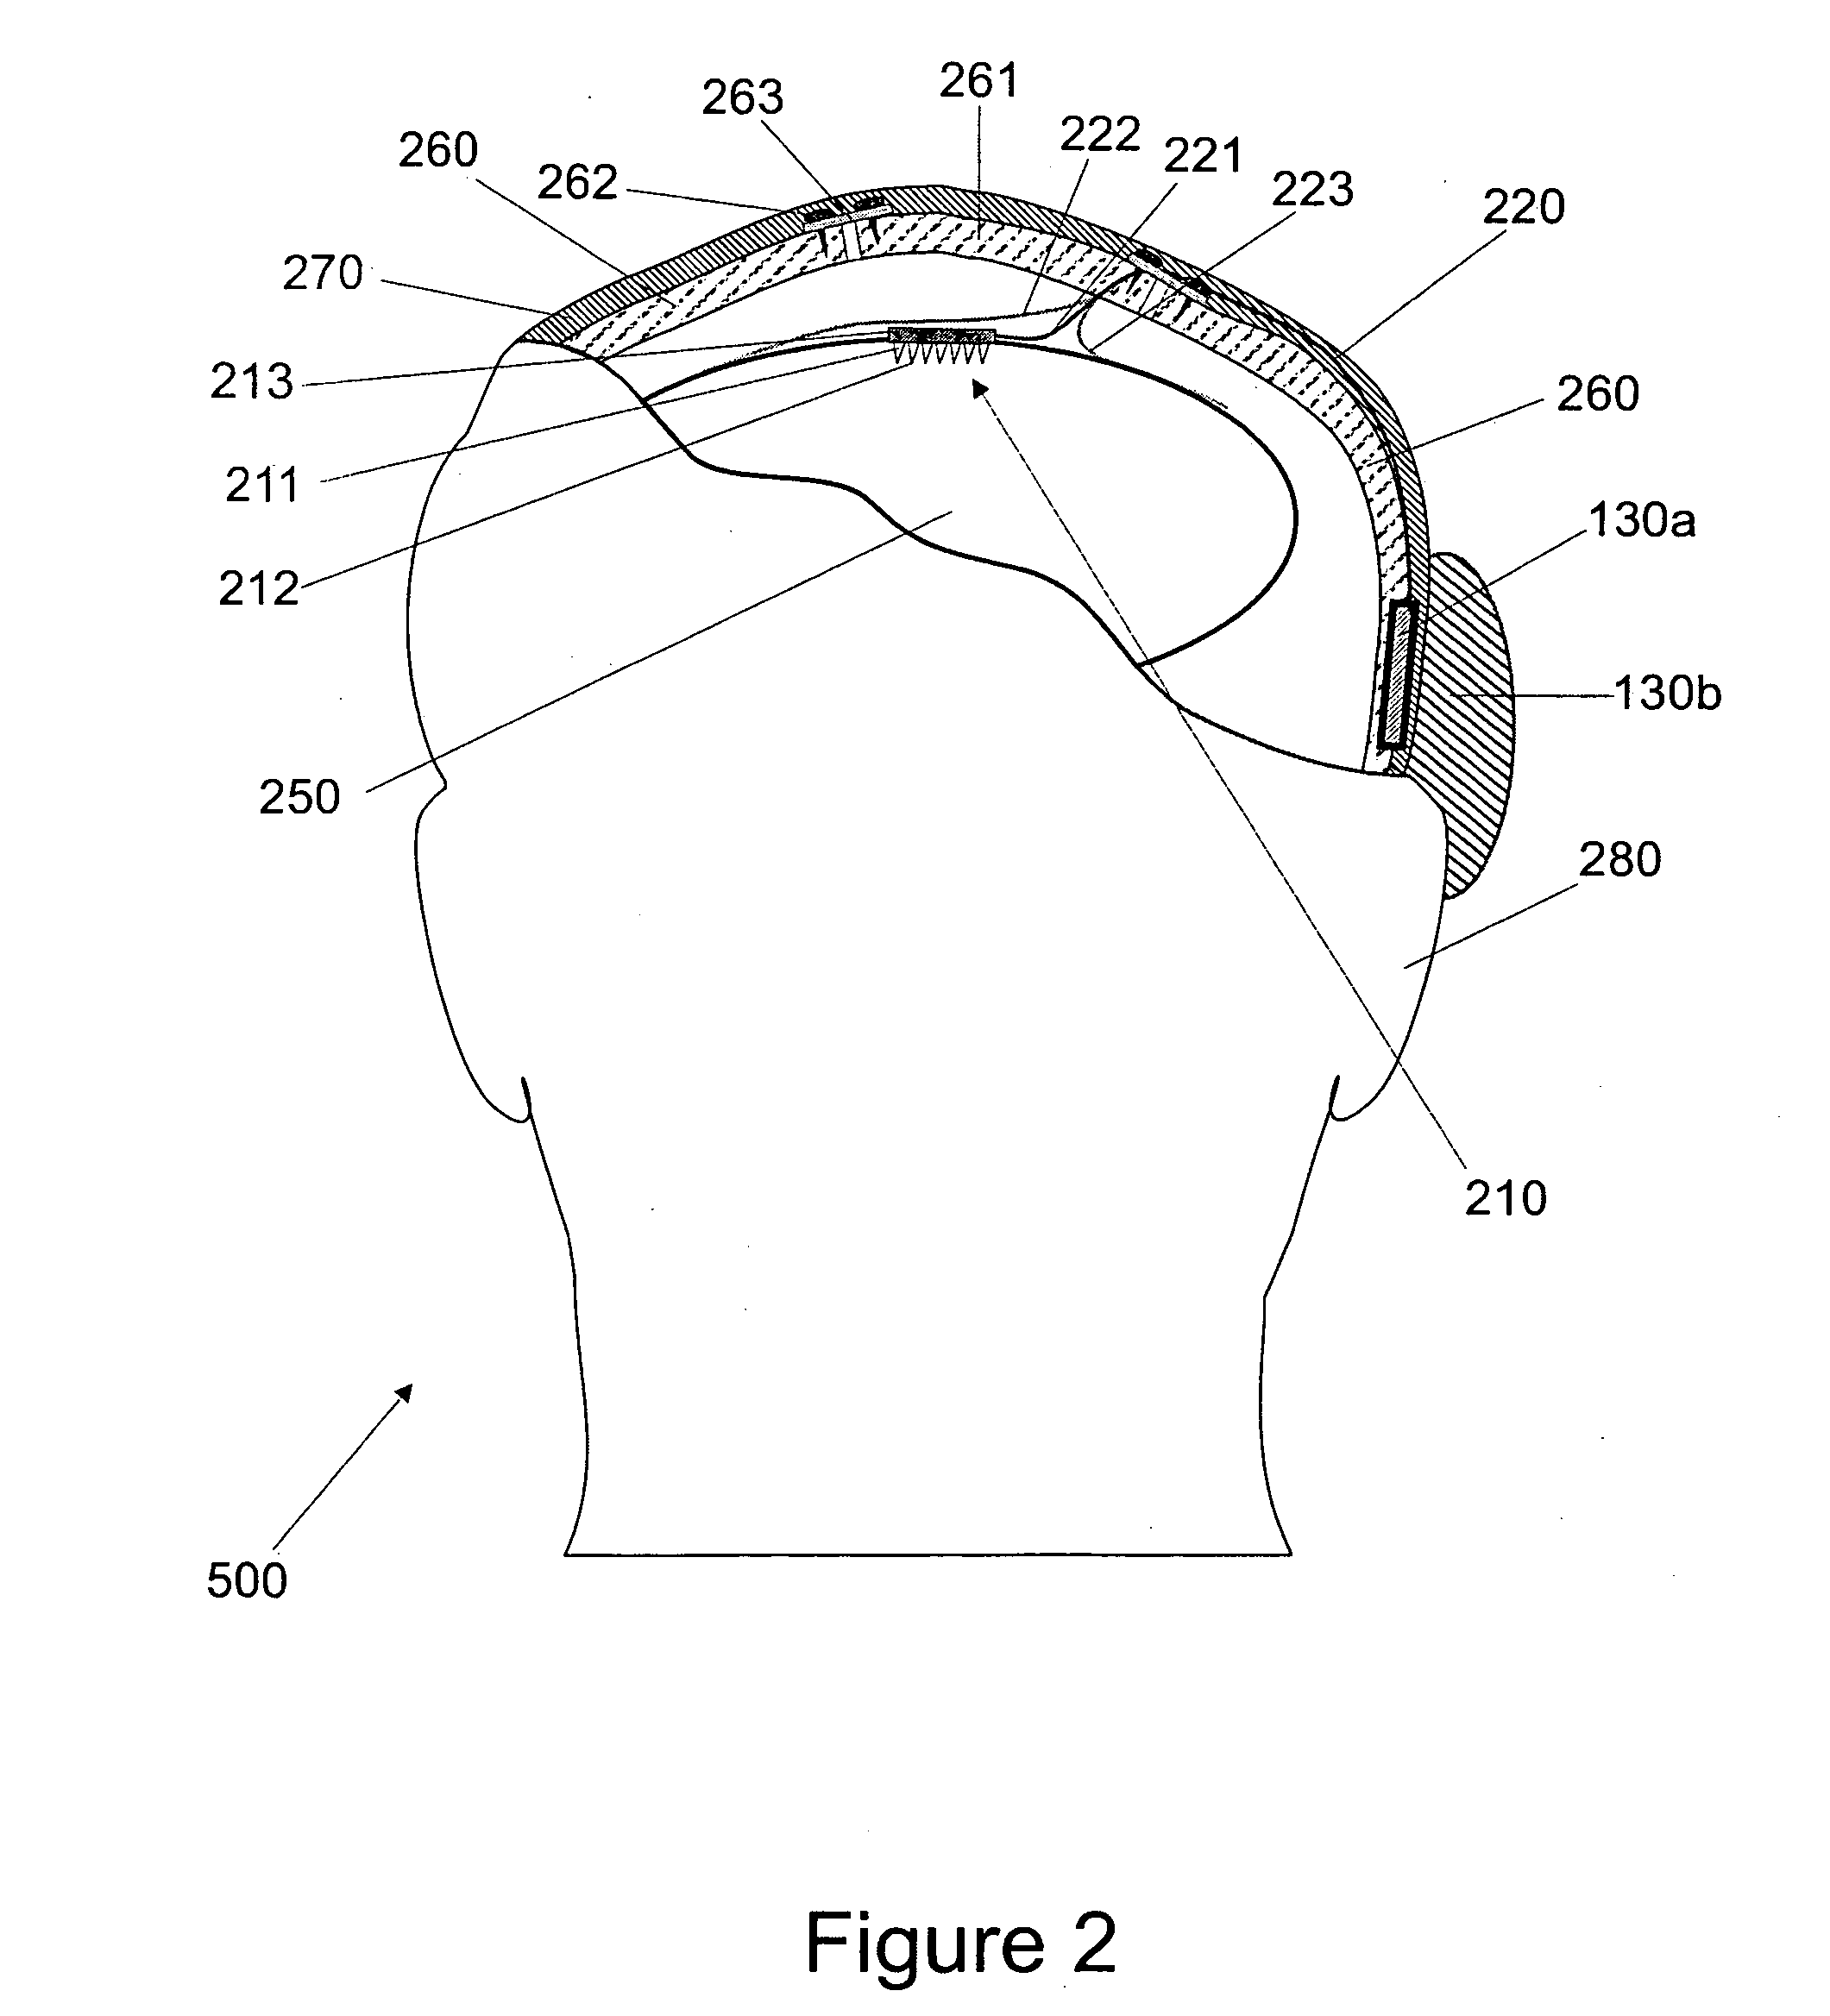 Biological interface systems with wireless connection and related methods